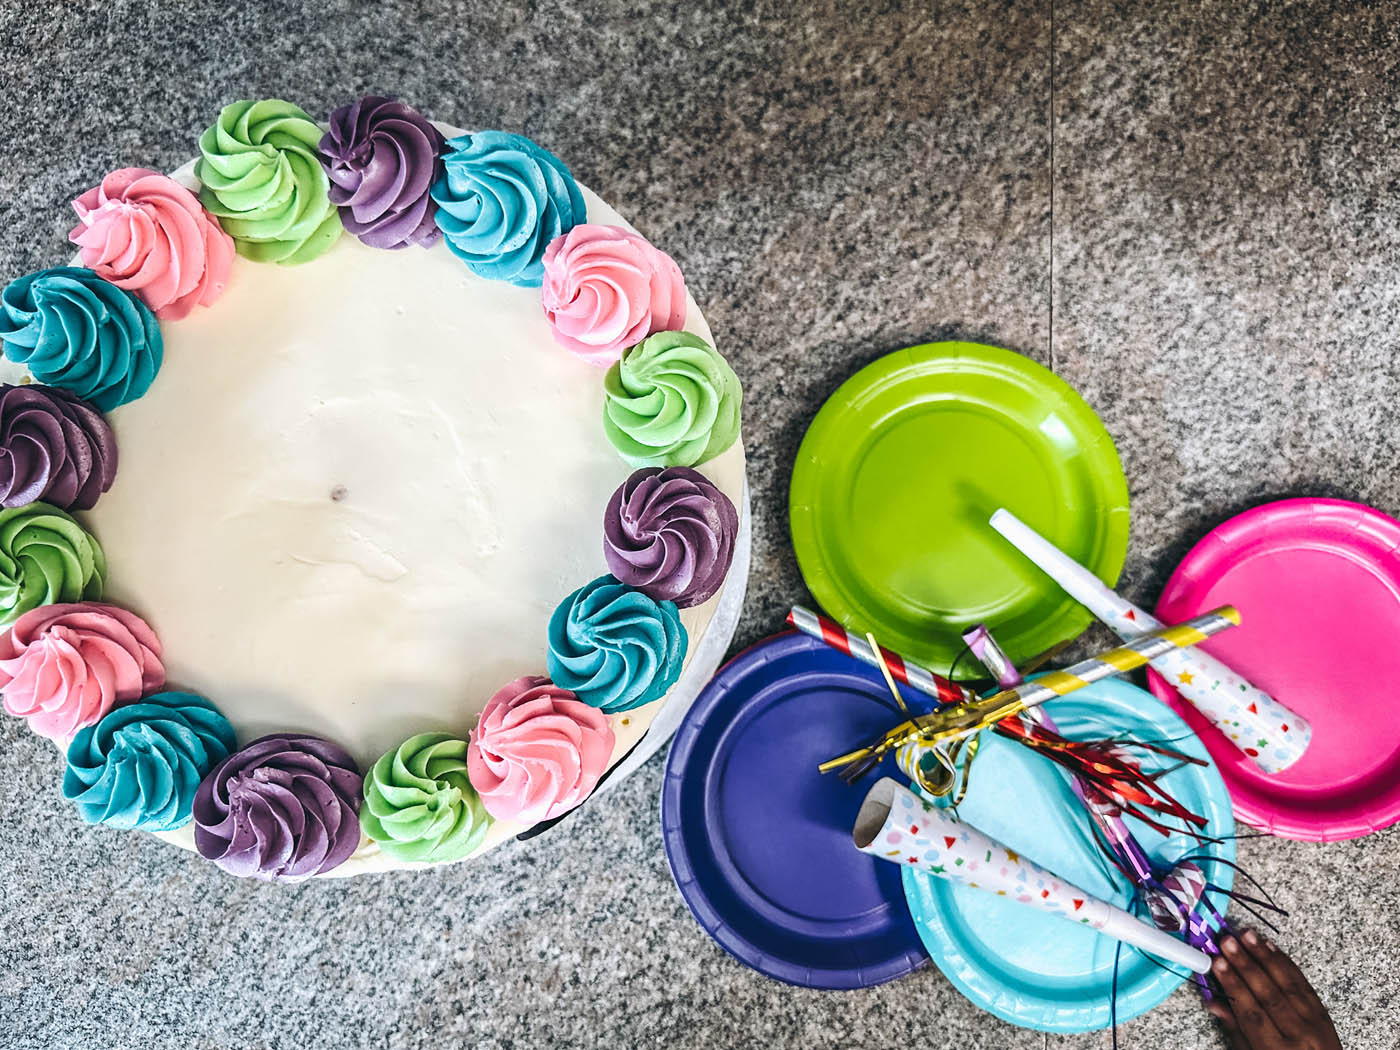 A cake and party supplies - party utensil supplies provided at Romp n' Roll toddler birthday venues in Midlothian, VA.